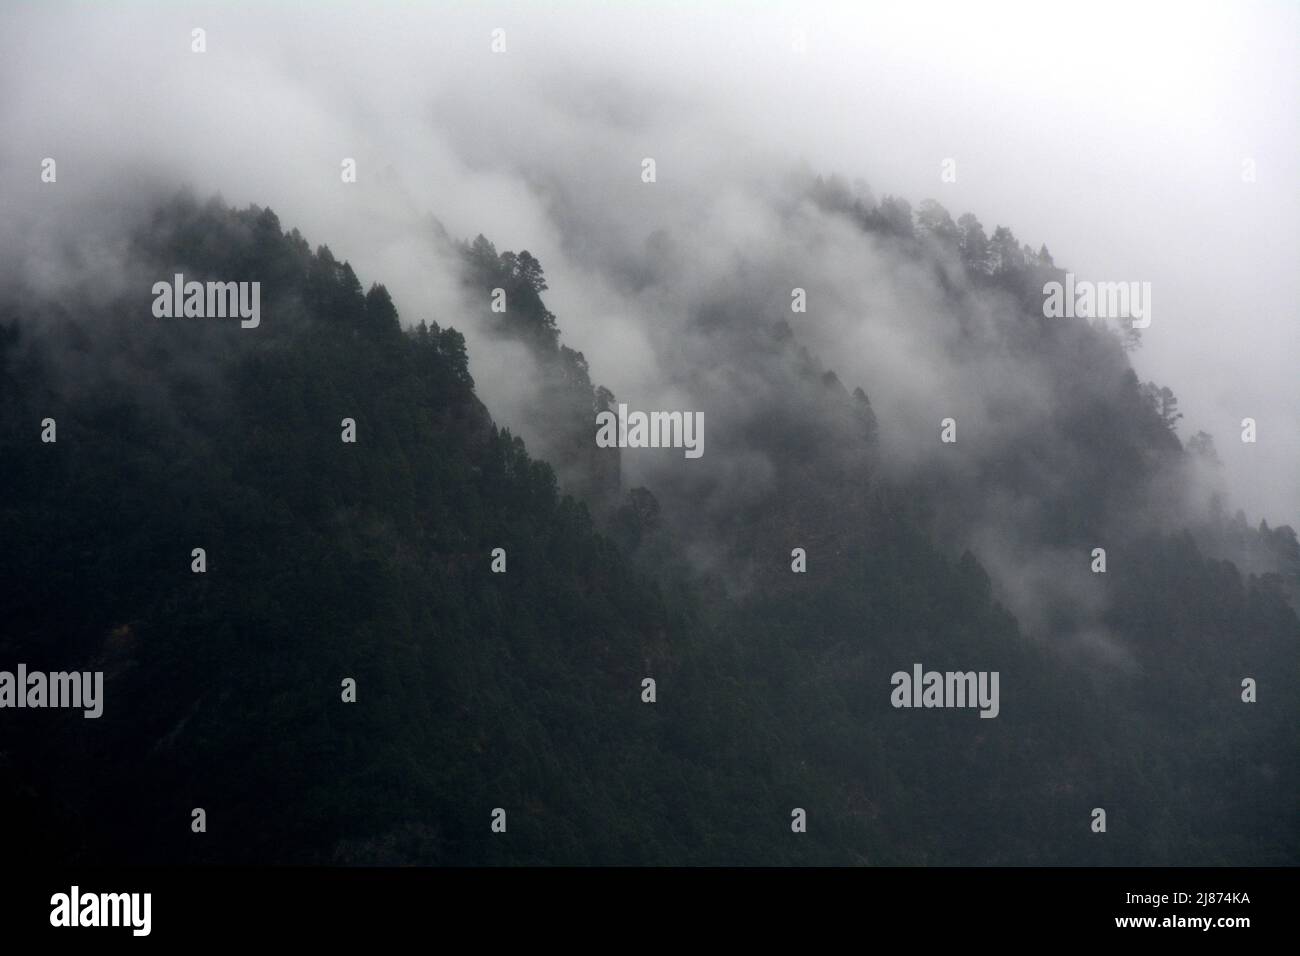 Mountains, forest and mist in the Oratova Valley on the island of Tenerife, Canary Islands, Spain. Stock Photo